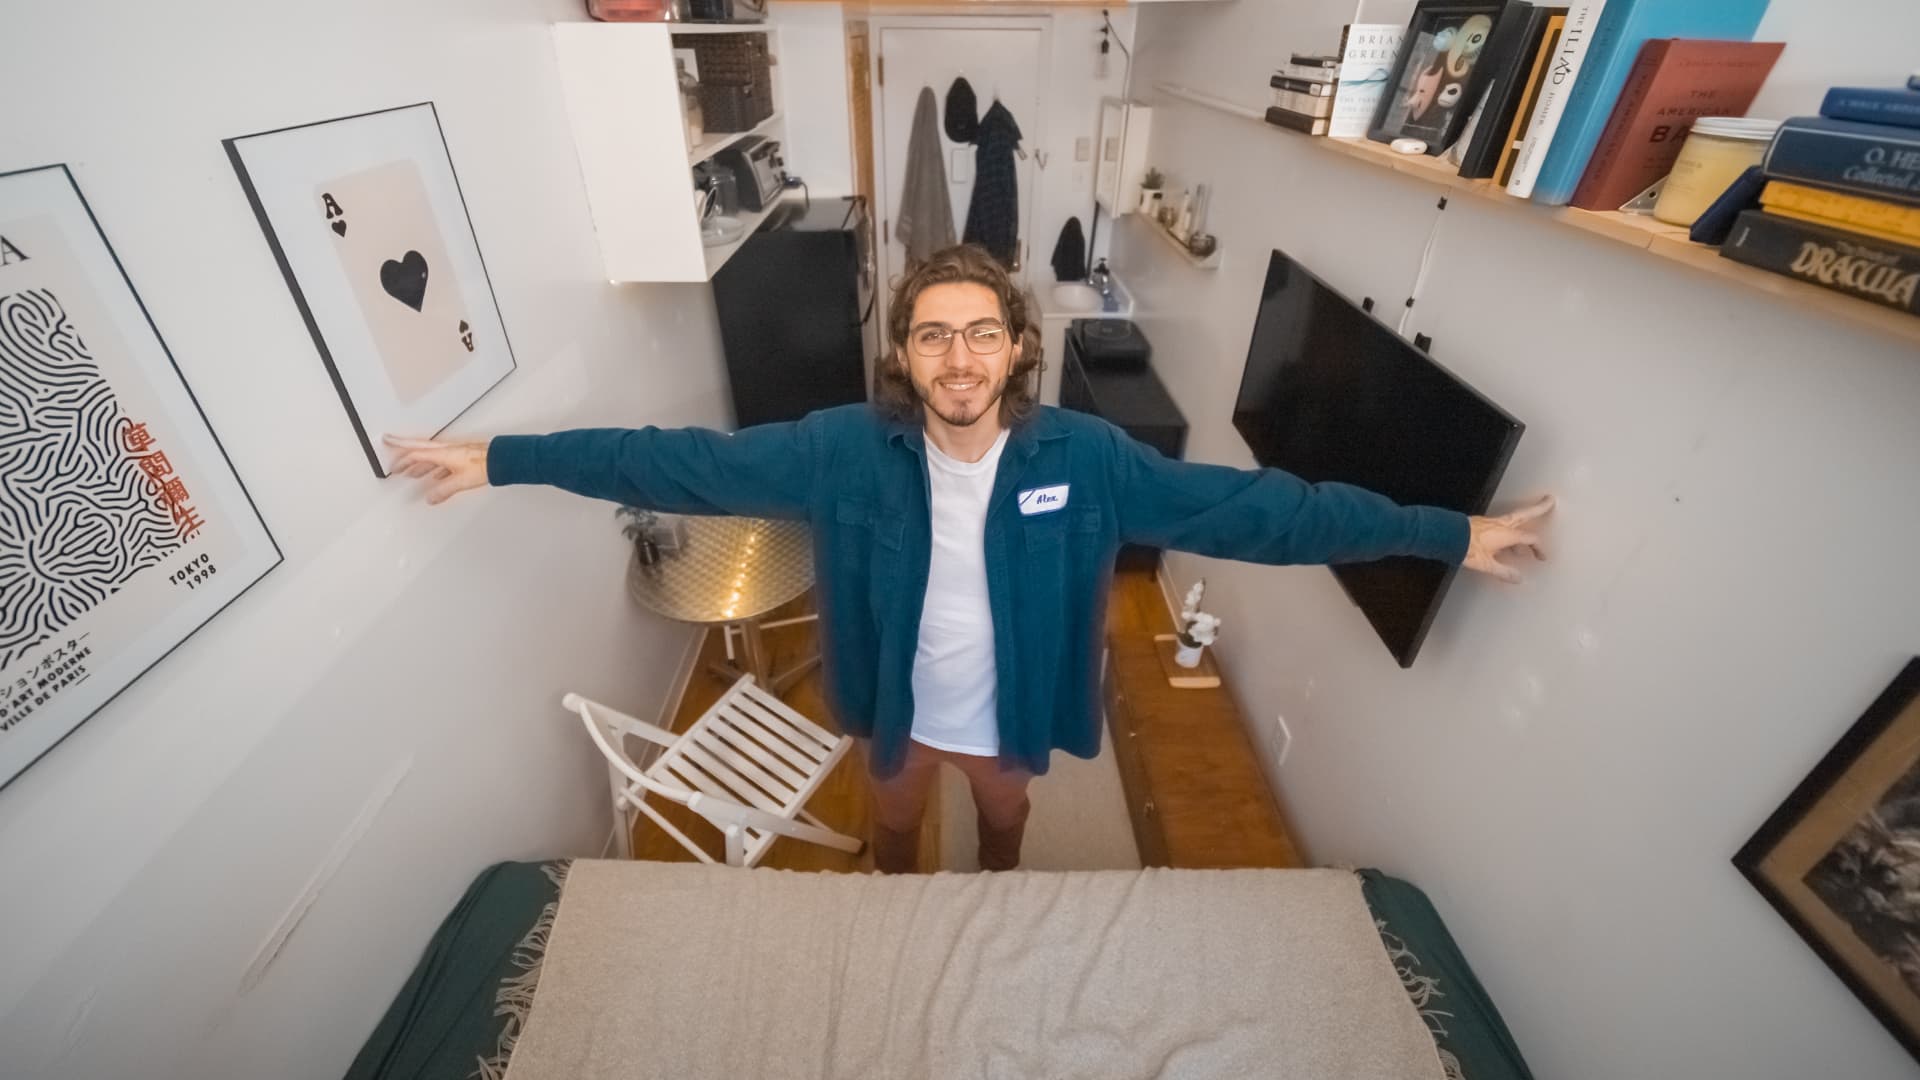 This 23-year-old pays $1,100 a month to rent a 95 sq. ft NYC apartment